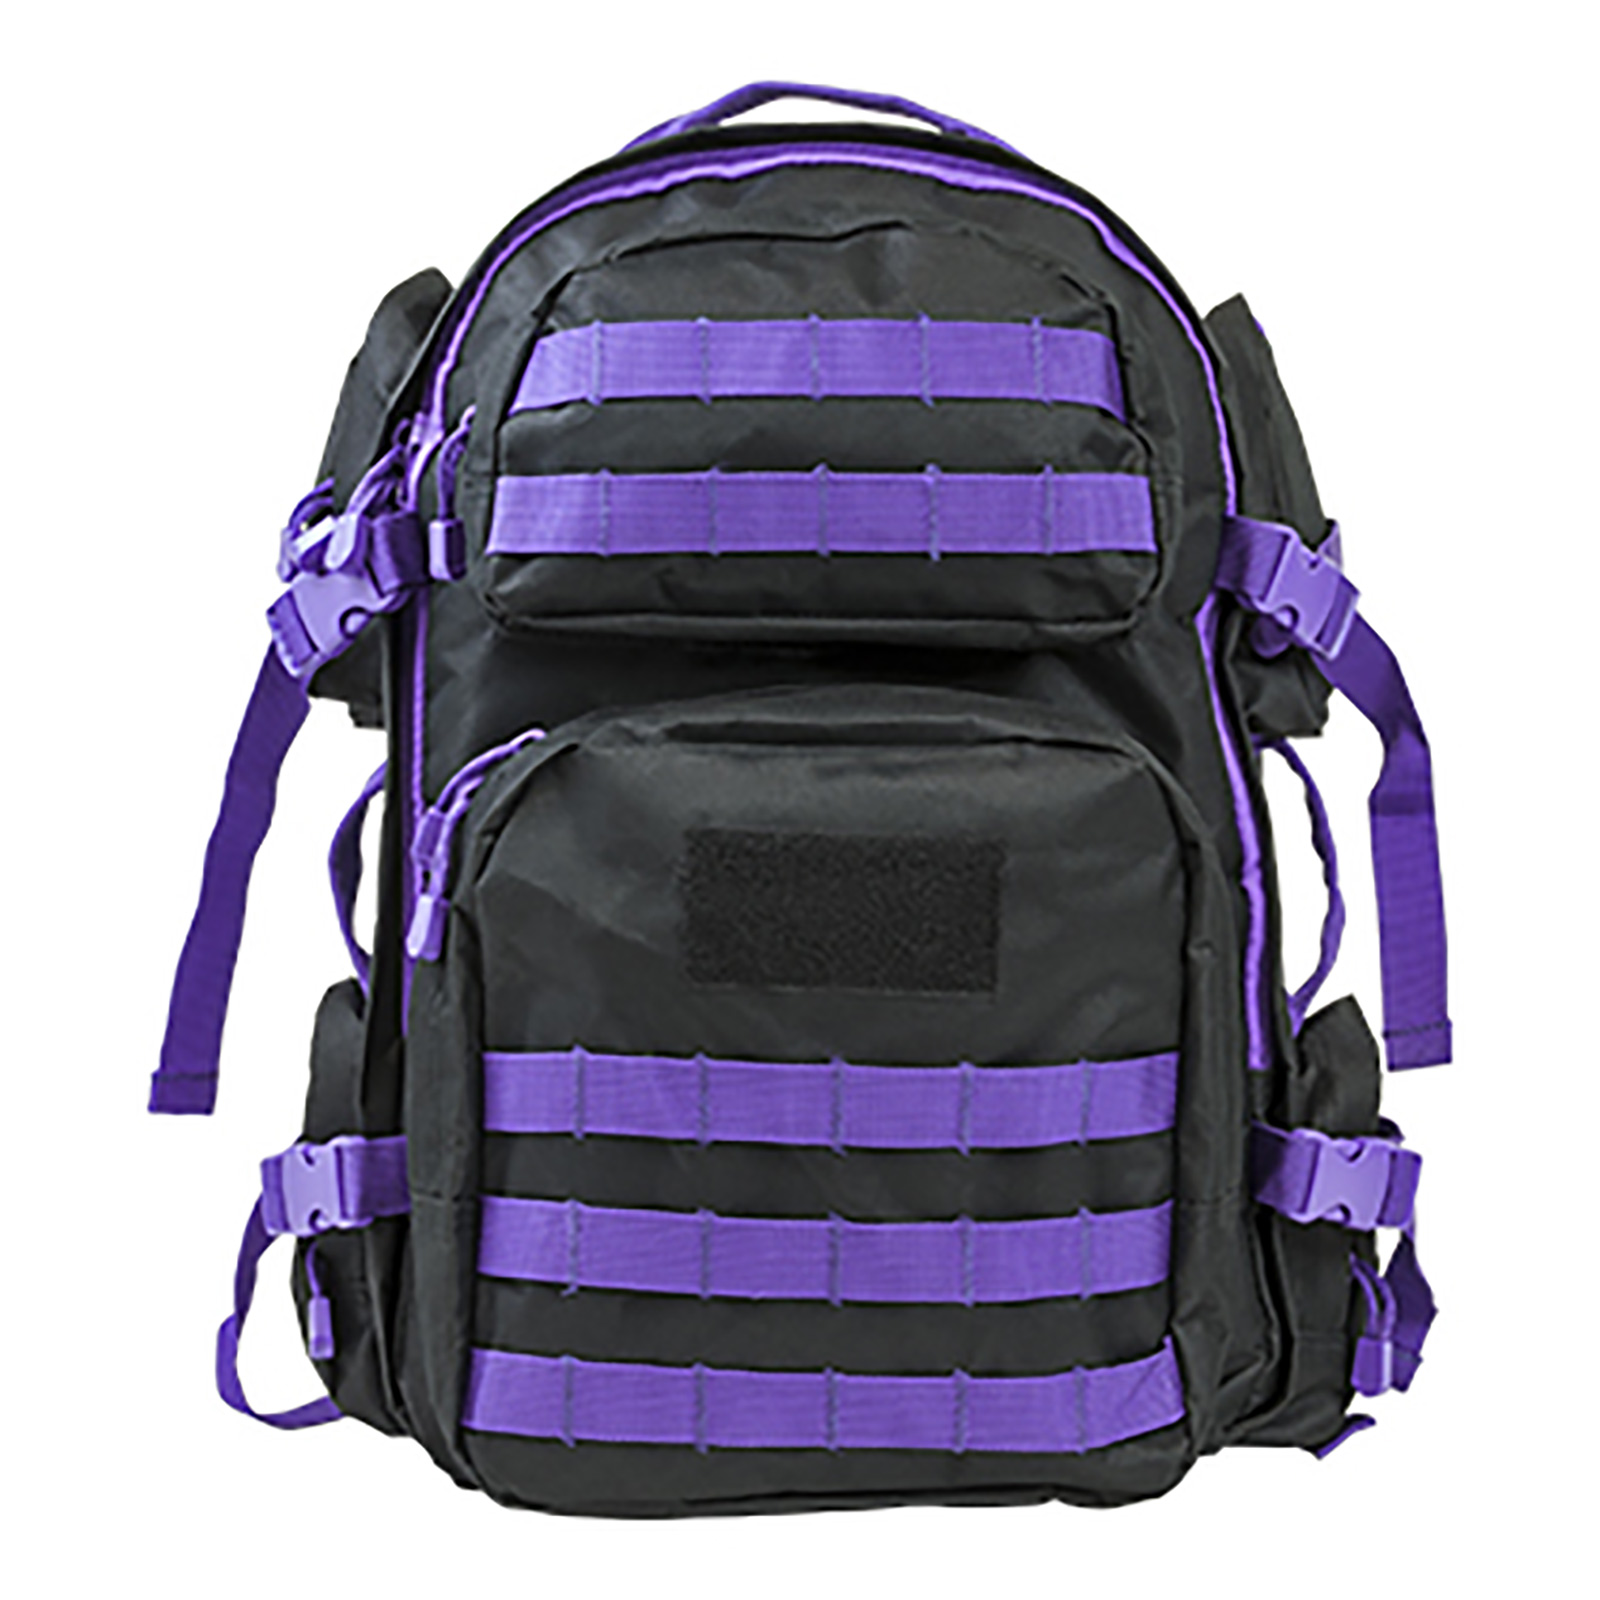 anc star vism tactical backpack black with purple